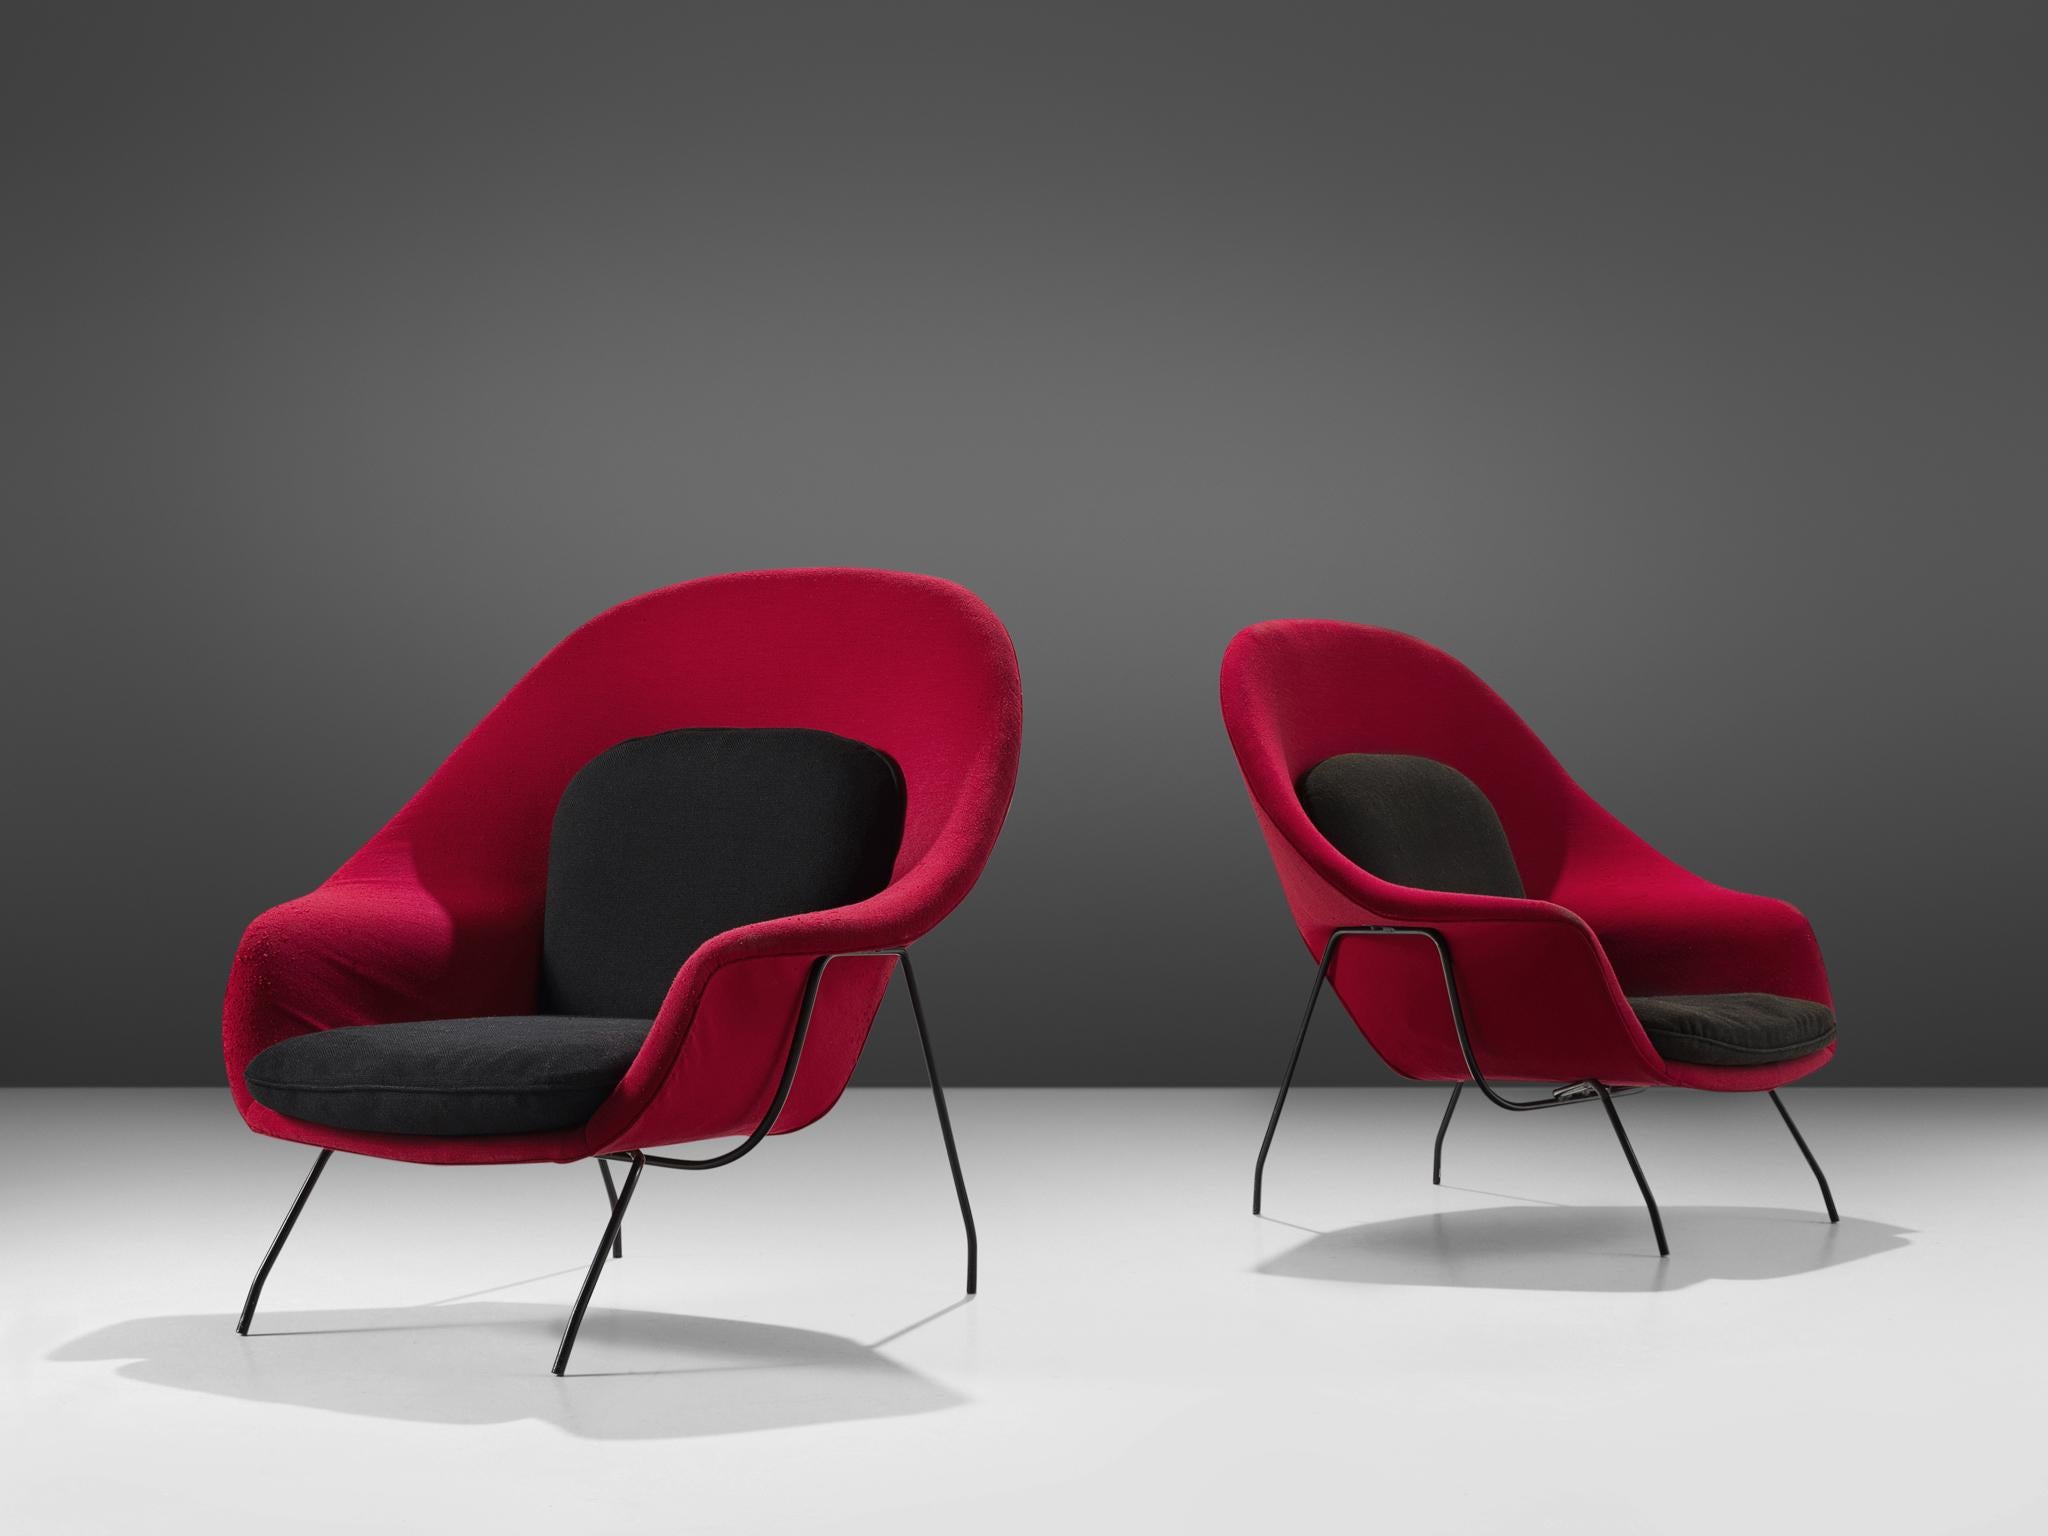 Eero Saarinen for Knoll, pair of 'Womb' easy chairs, fabric, coated steel, United States, design 1948

This shelled, cushioned lounge chair ‘Womb’ was designed between 1946 and 1948 by Eero Saarinen. The chair was a specific request by Florence